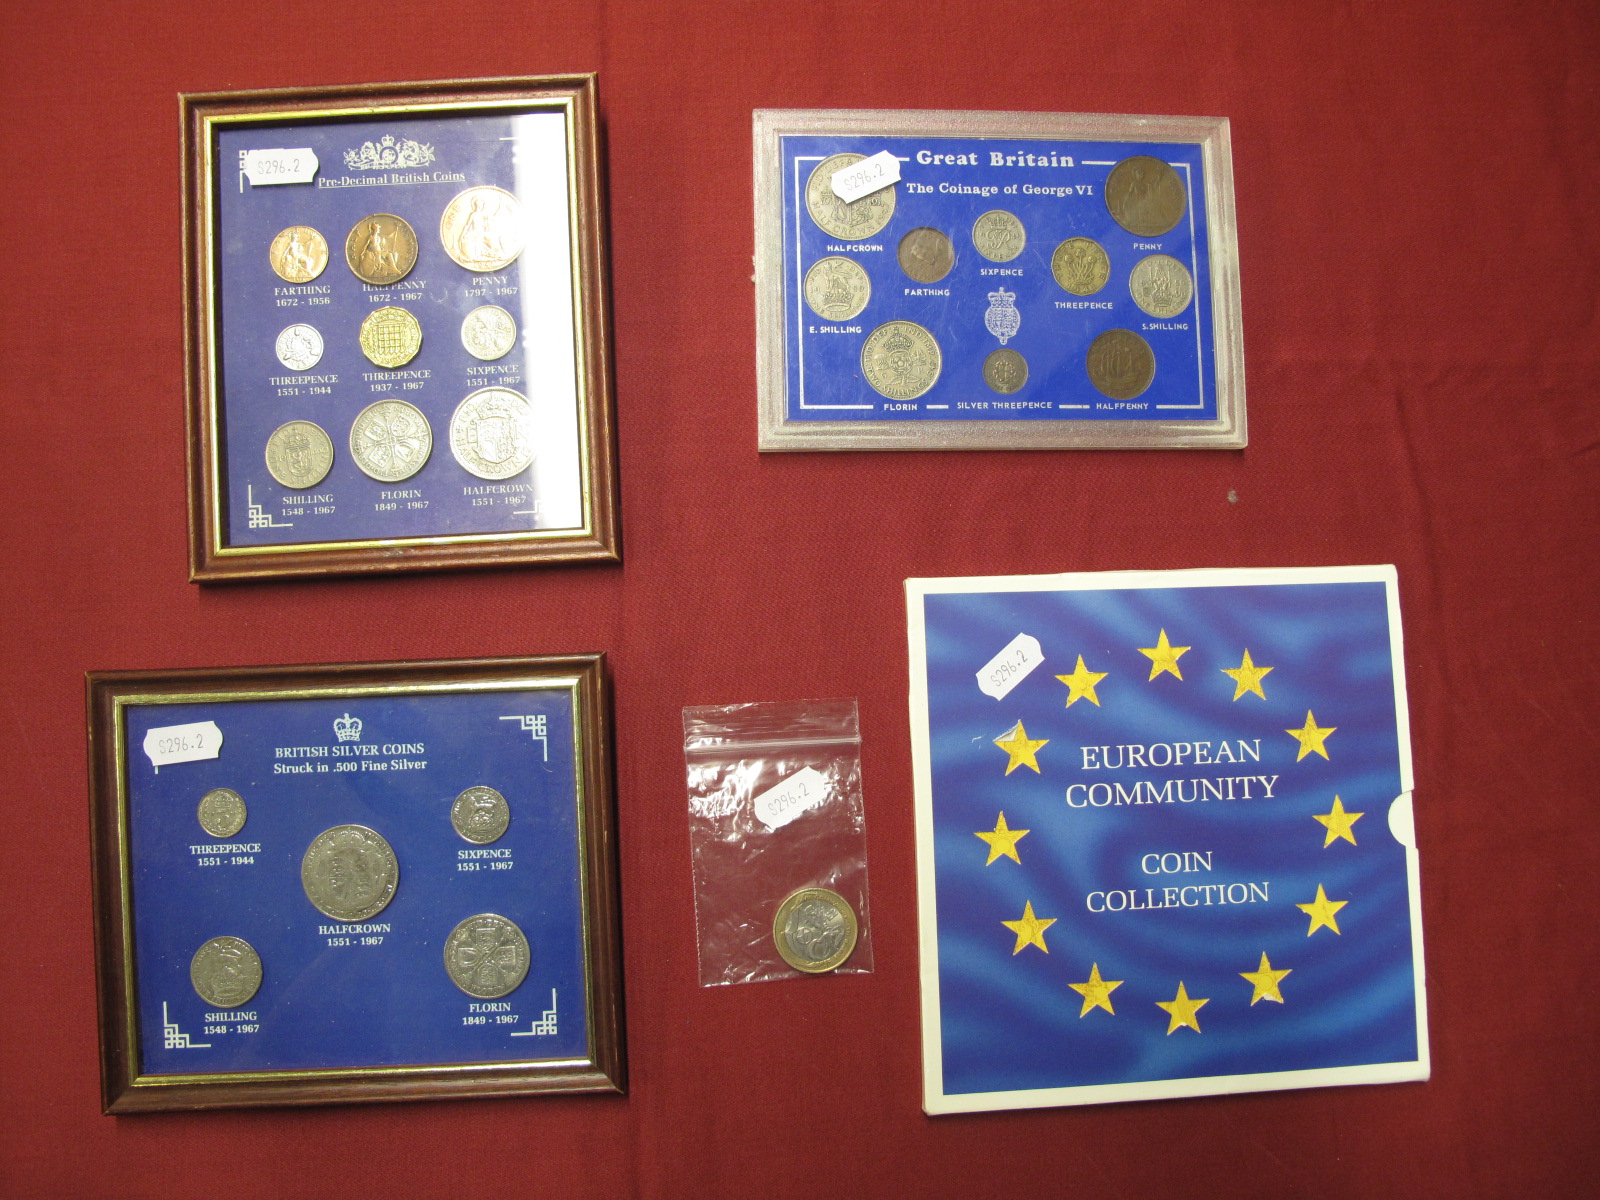 Two Framed Pre-Decimal Coin Sets, including British Silver Coins, Farthing, Halfcrown, Great Britain